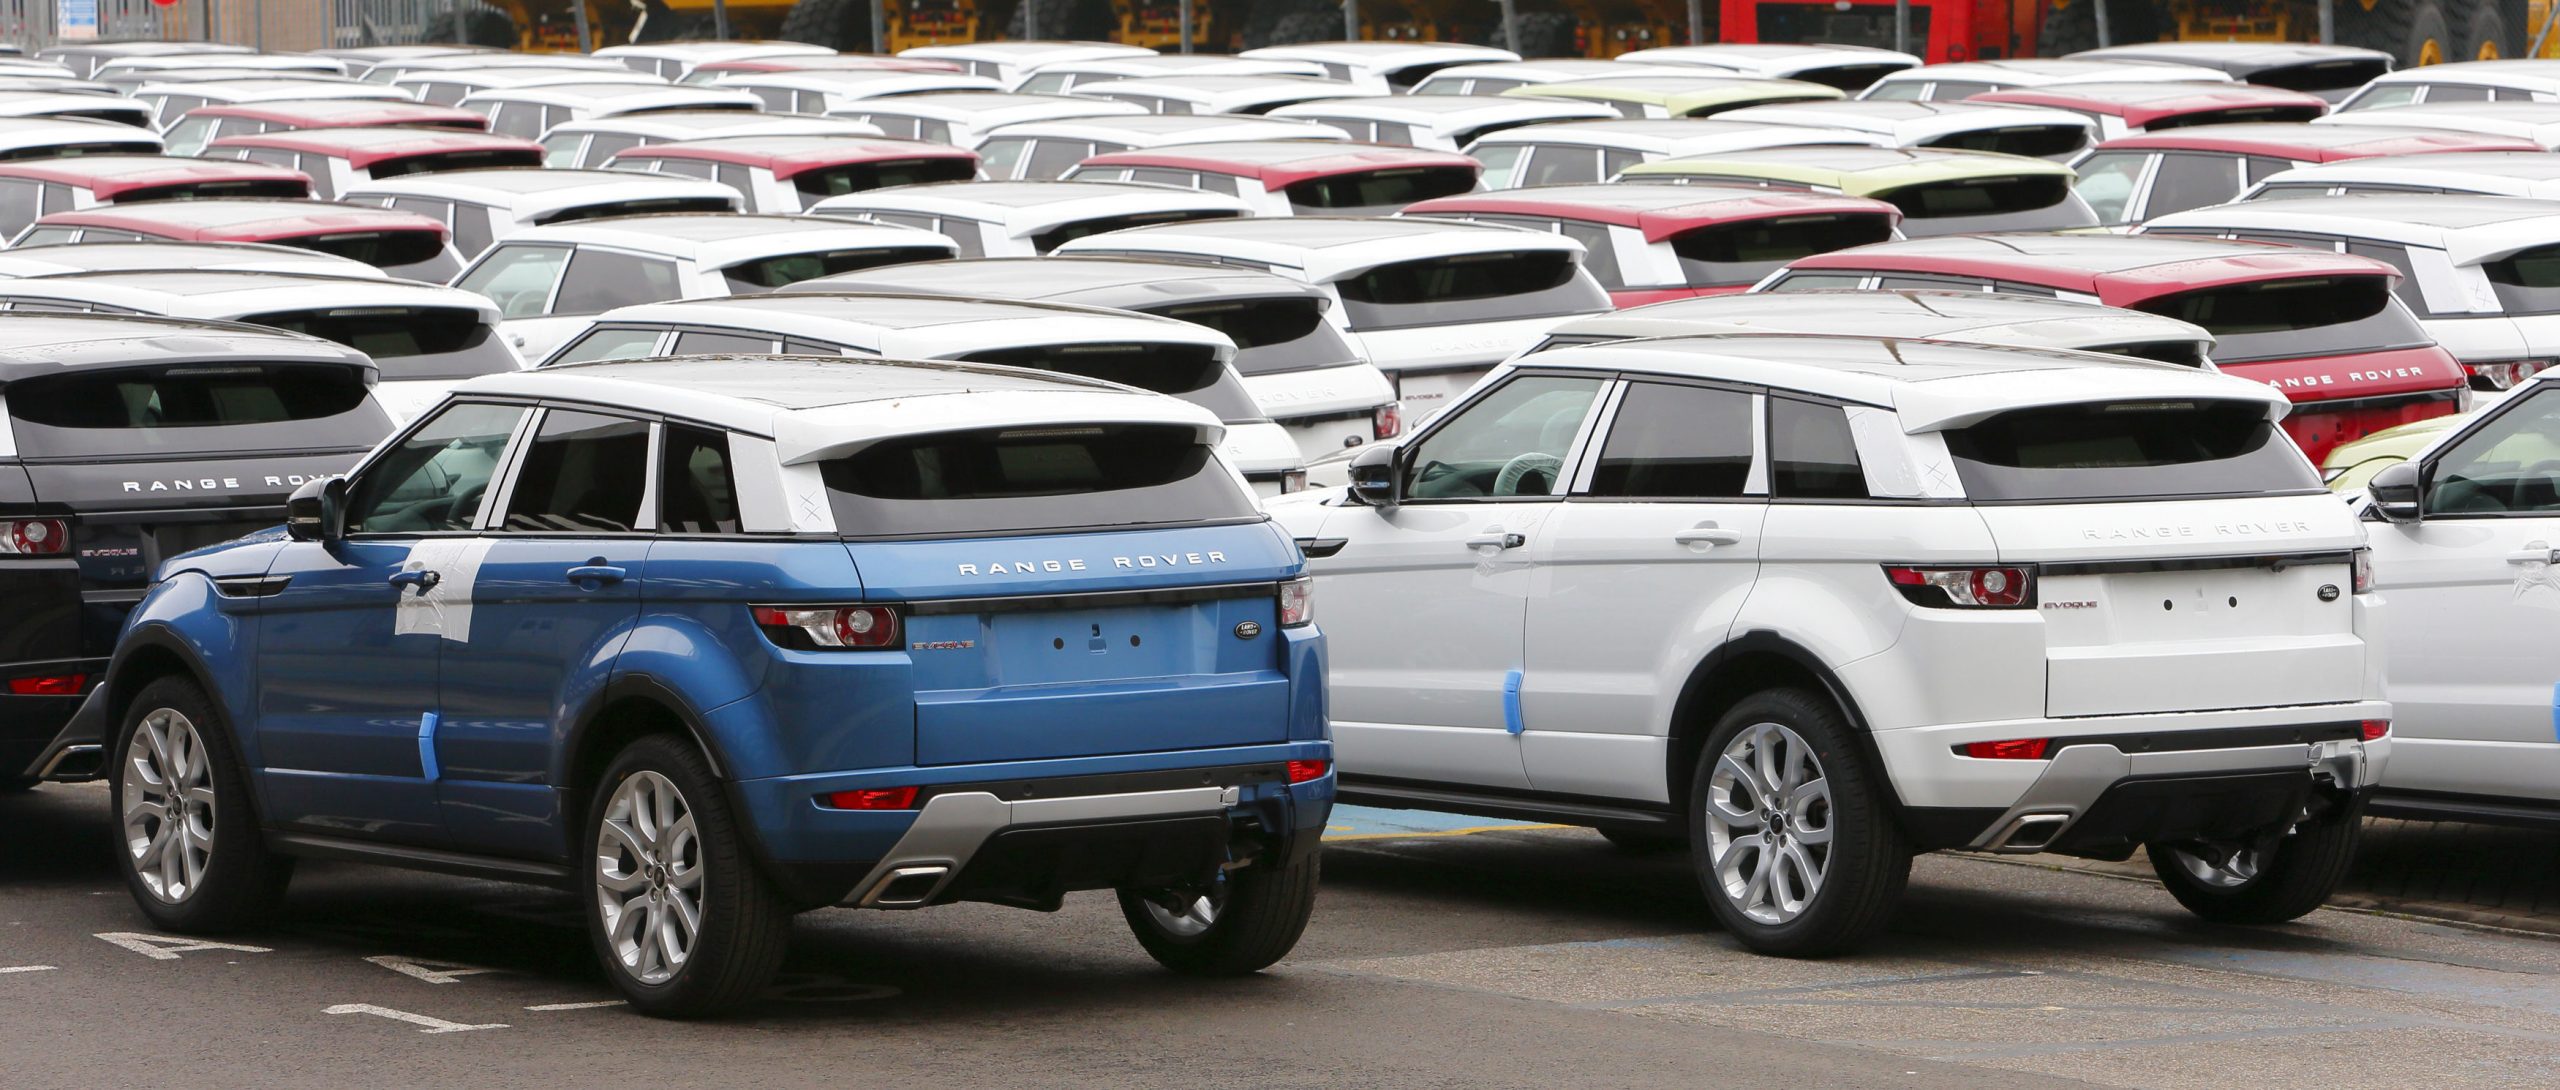 Jaguar Land Rover wins Chinese court case over copy of